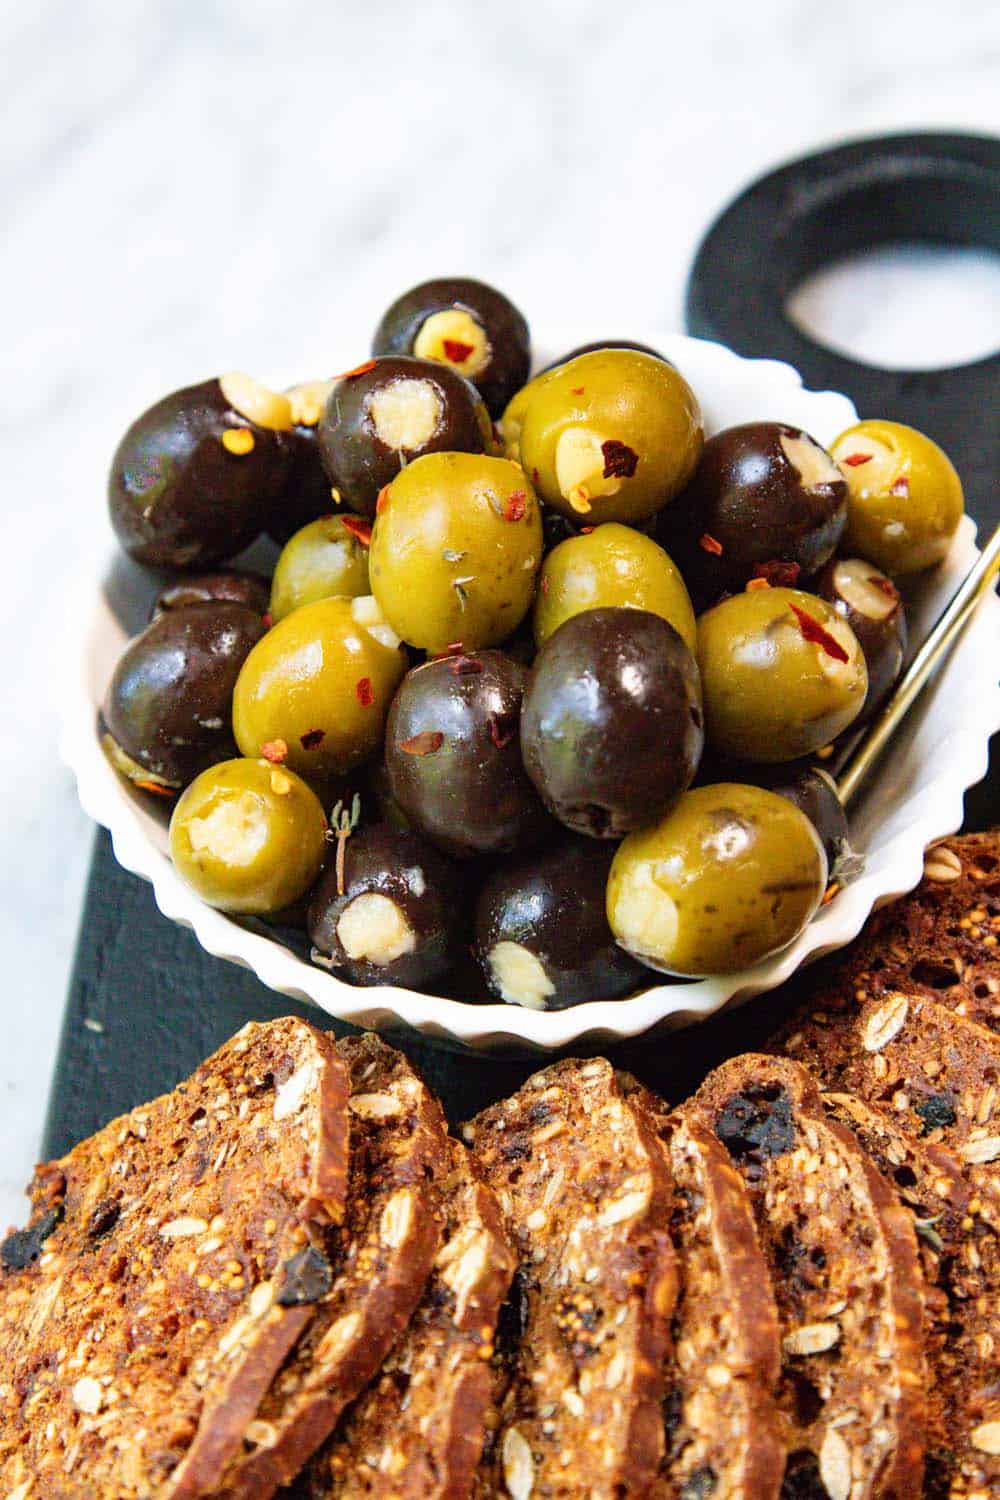 The Easiest Olive Recipe: How To Make Garlic Confit Stuffed Olives